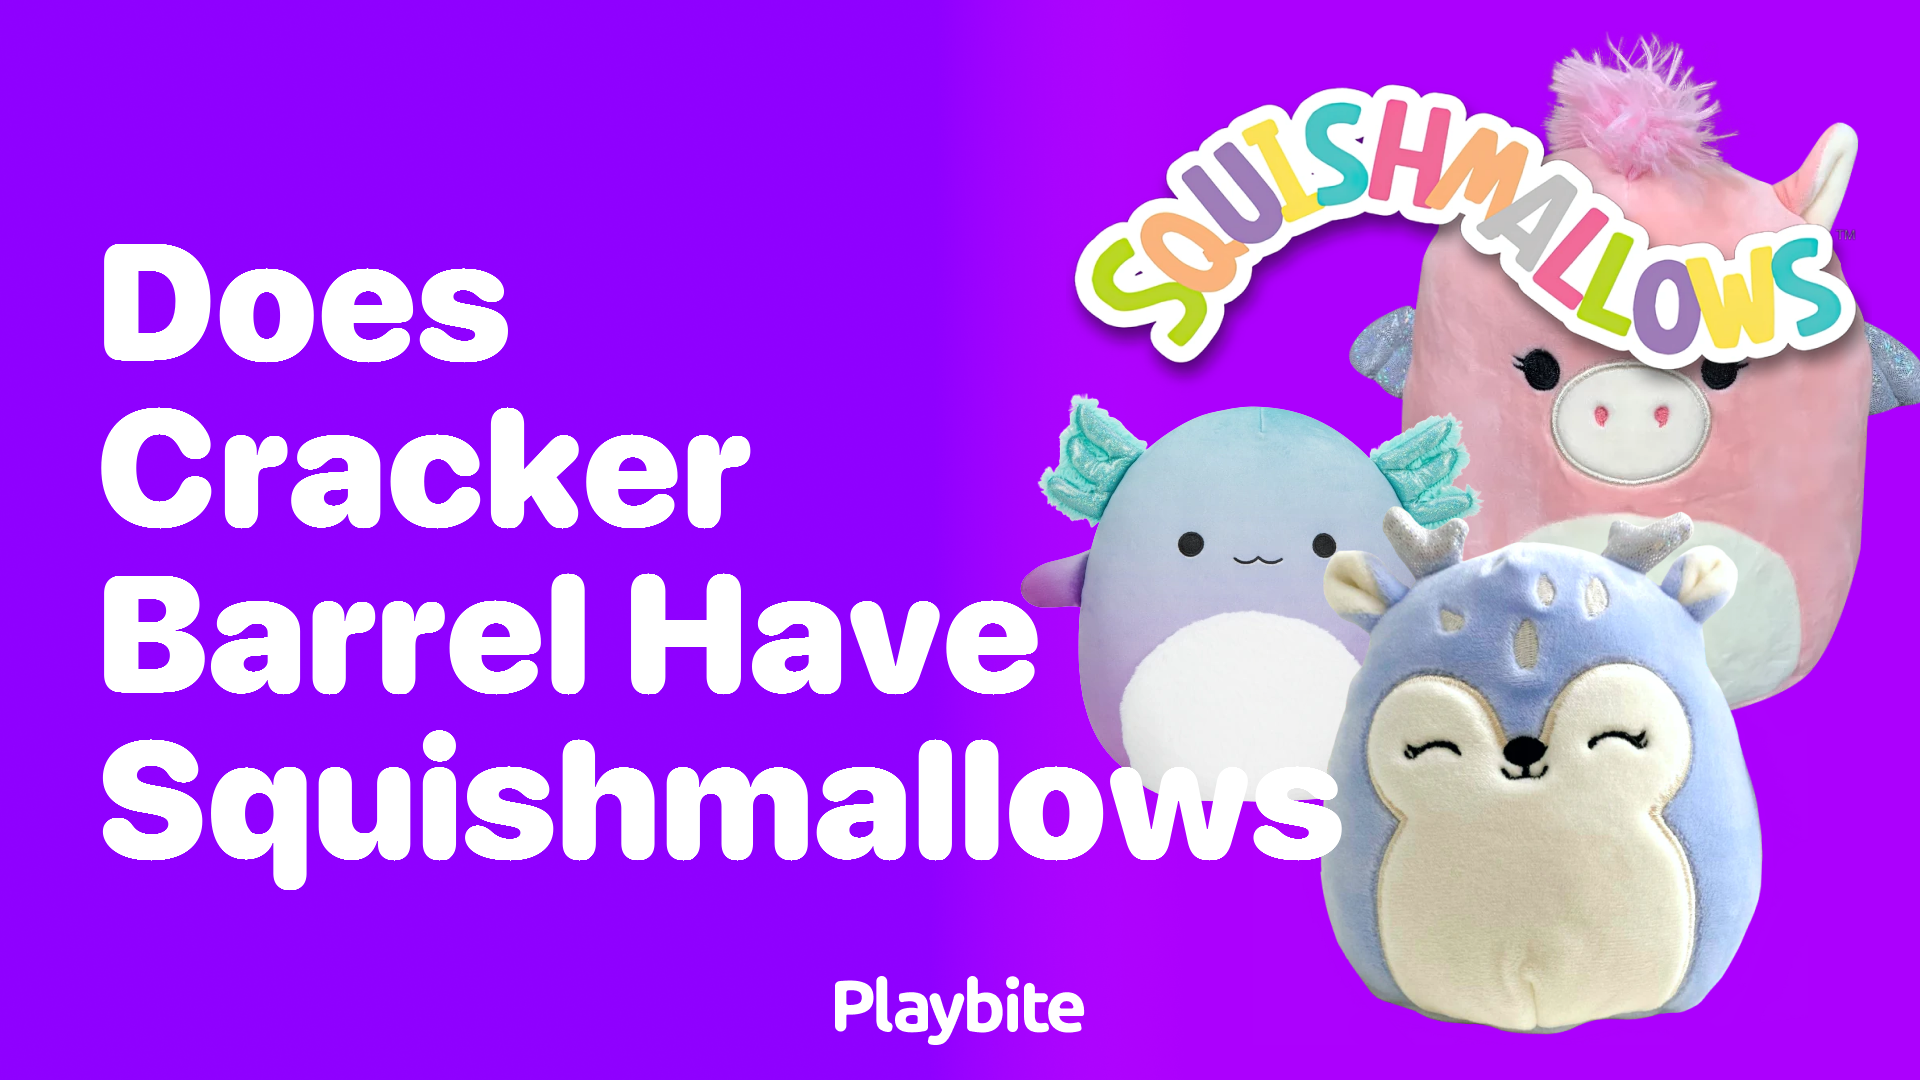 Does Cracker Barrel Have Squishmallows?